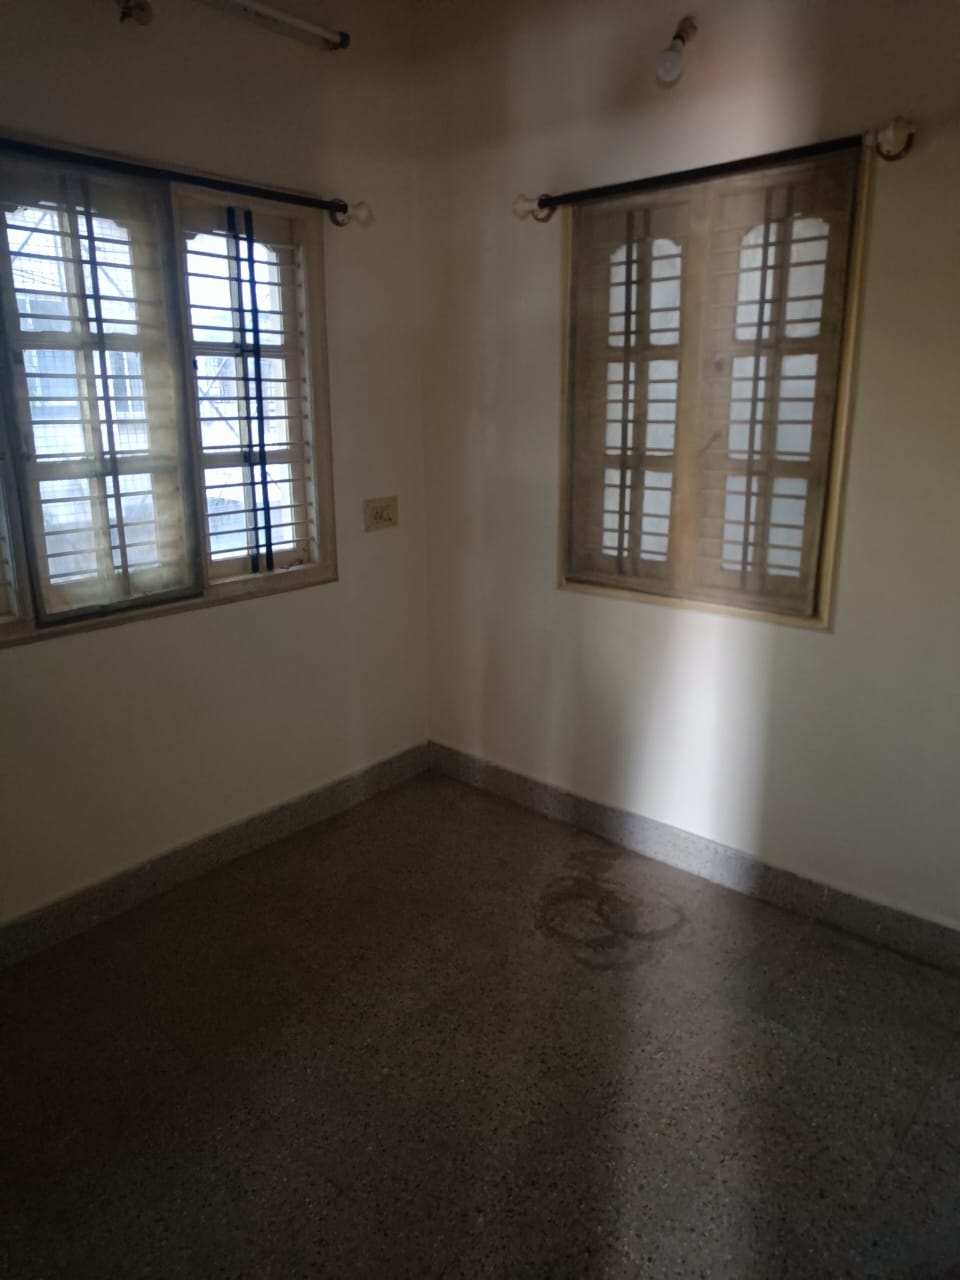 2 BHK Independent House for Lease Only at JAML2 - 2361 in Koramangala